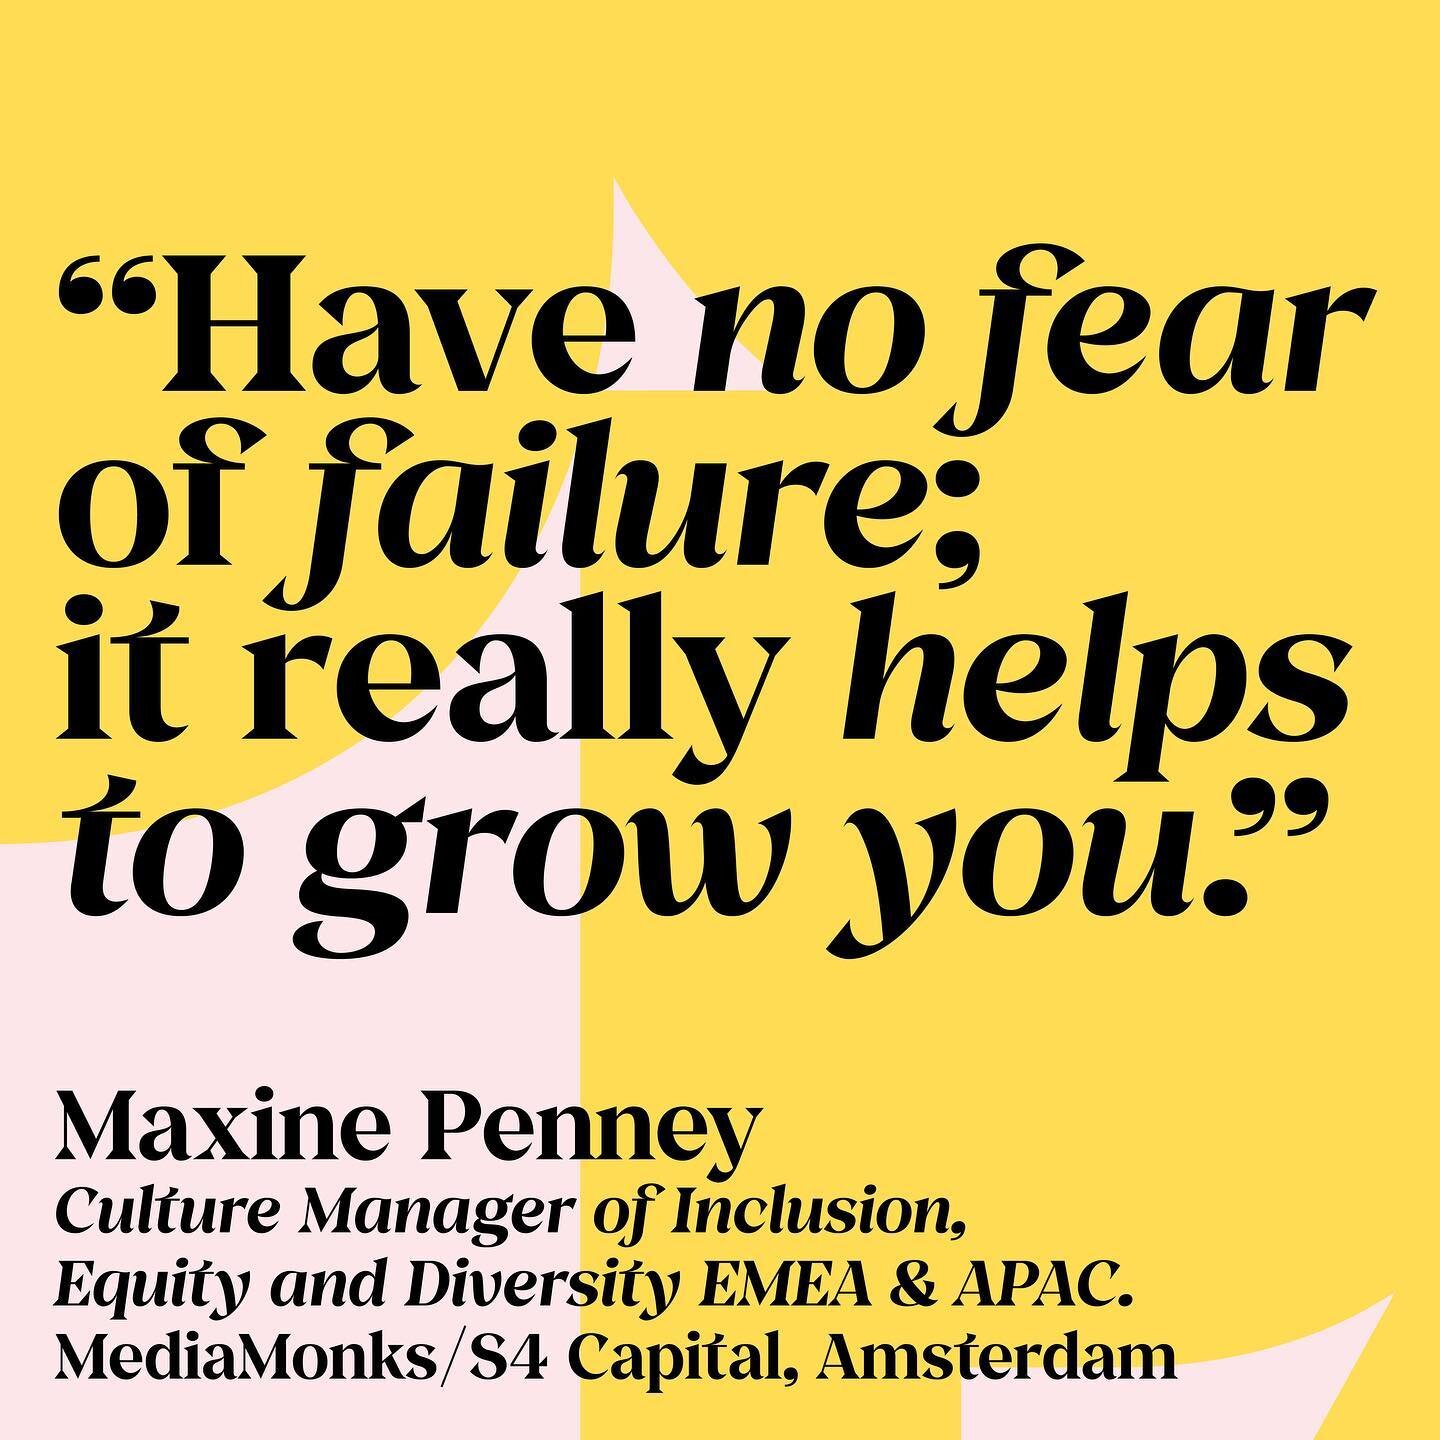 EP06 is out now. 
WARNING: This podcast will affect your mind (in a positive way).

EP06 features&nbsp;@mpenney @freshhhconnections Culture Manager of Inclusion, Equity and Diversity (EMEA &amp; APAC) @mediamonks / S4 Capital, Amsterdam.

In this epi